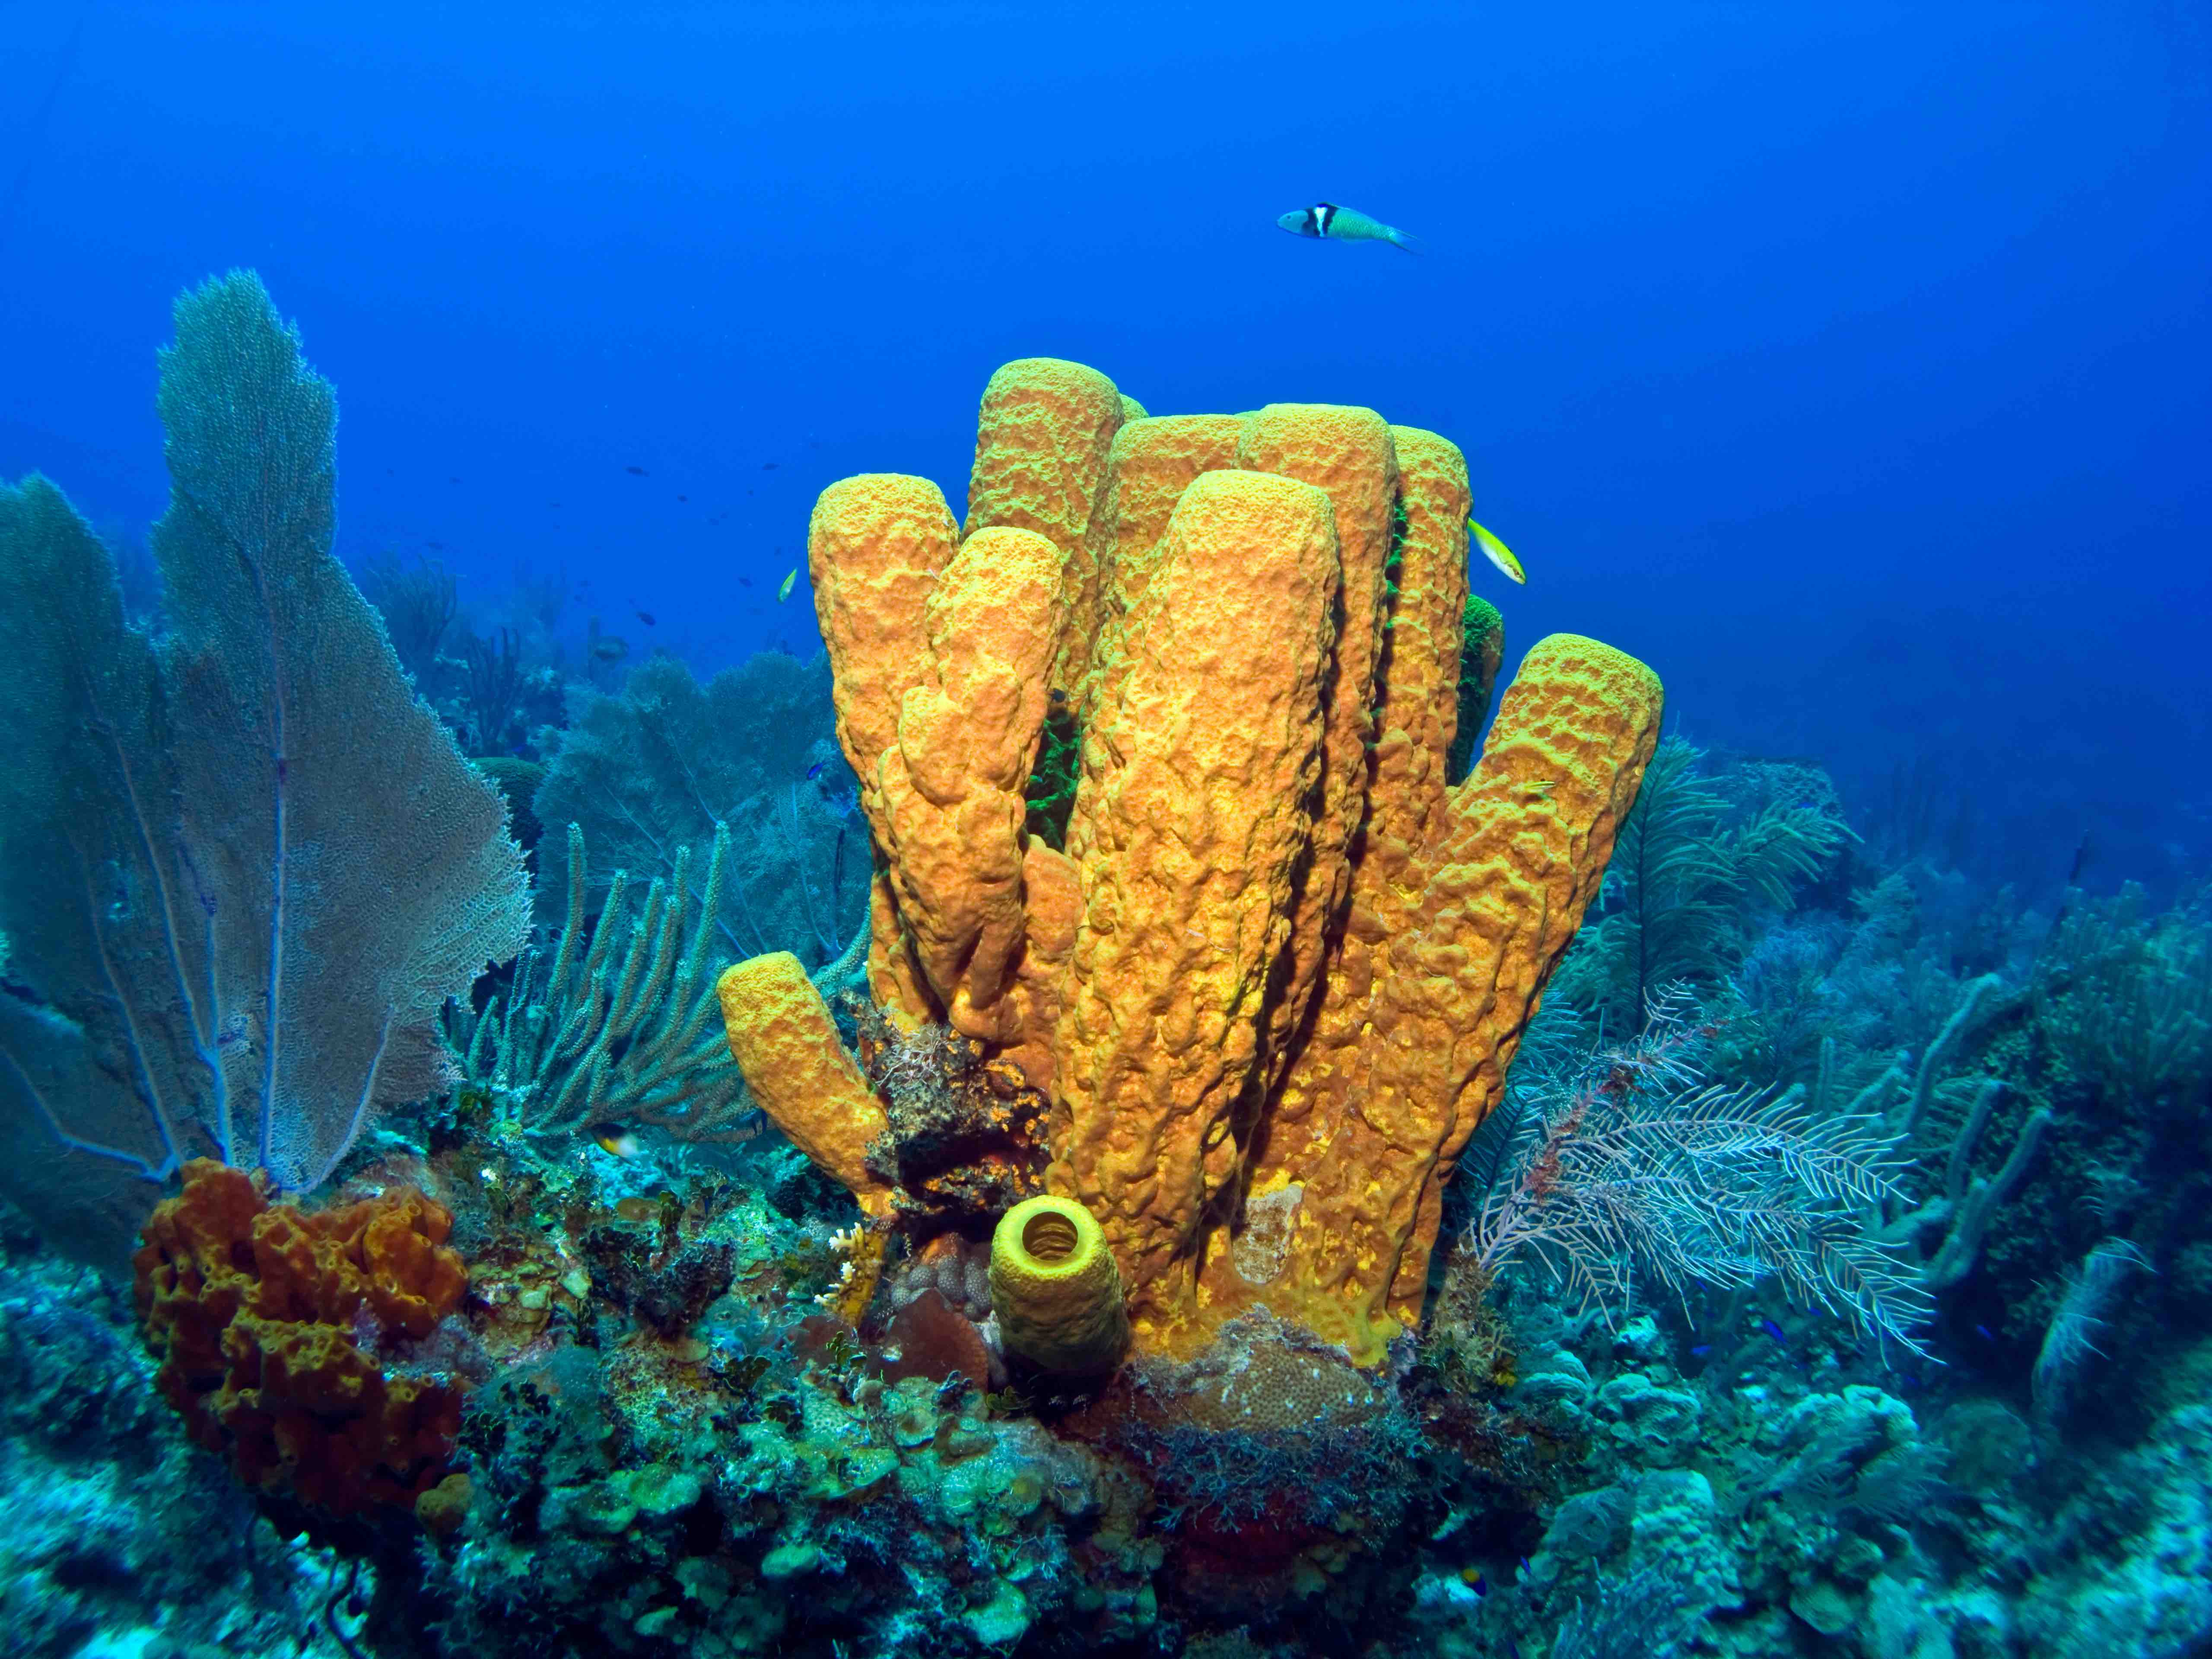 18 Sea Sponge Facts About These Underwater Wonders 